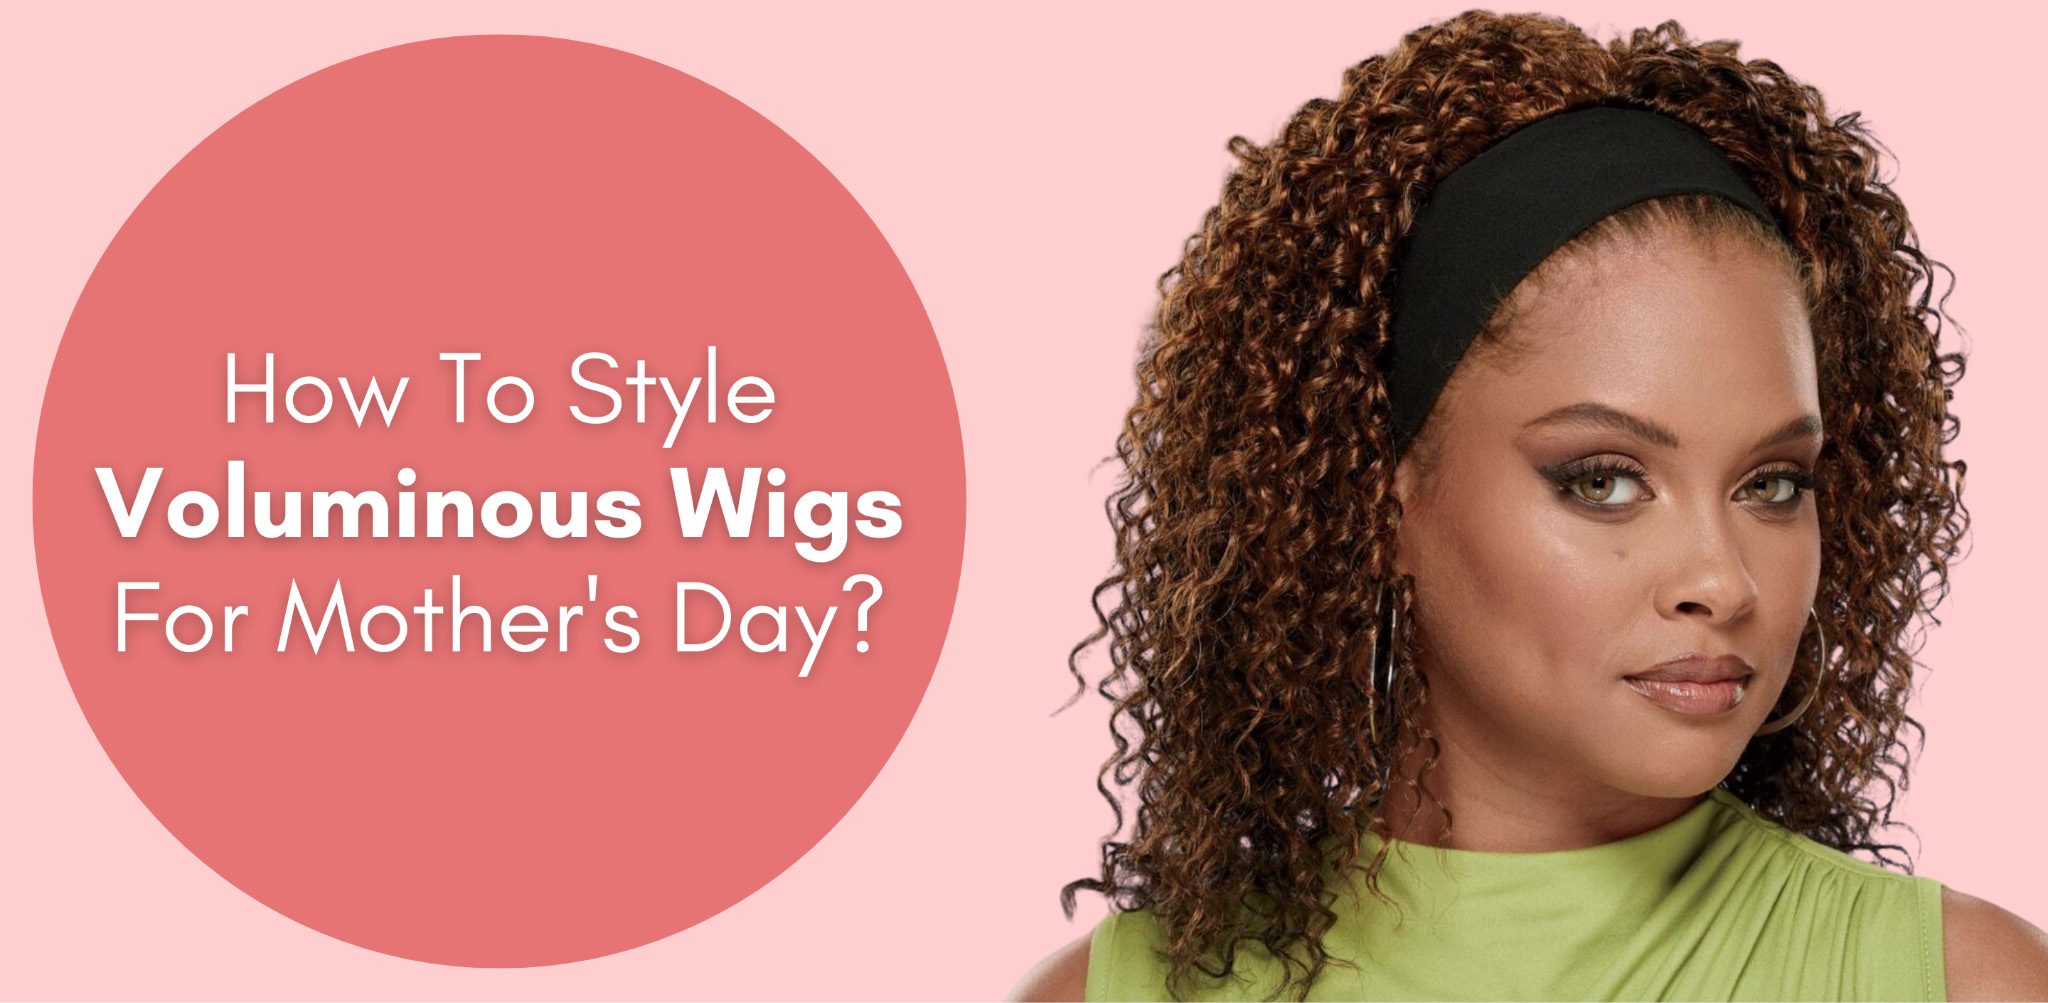 How To Style Voluminous Wigs For Mother’s Day?